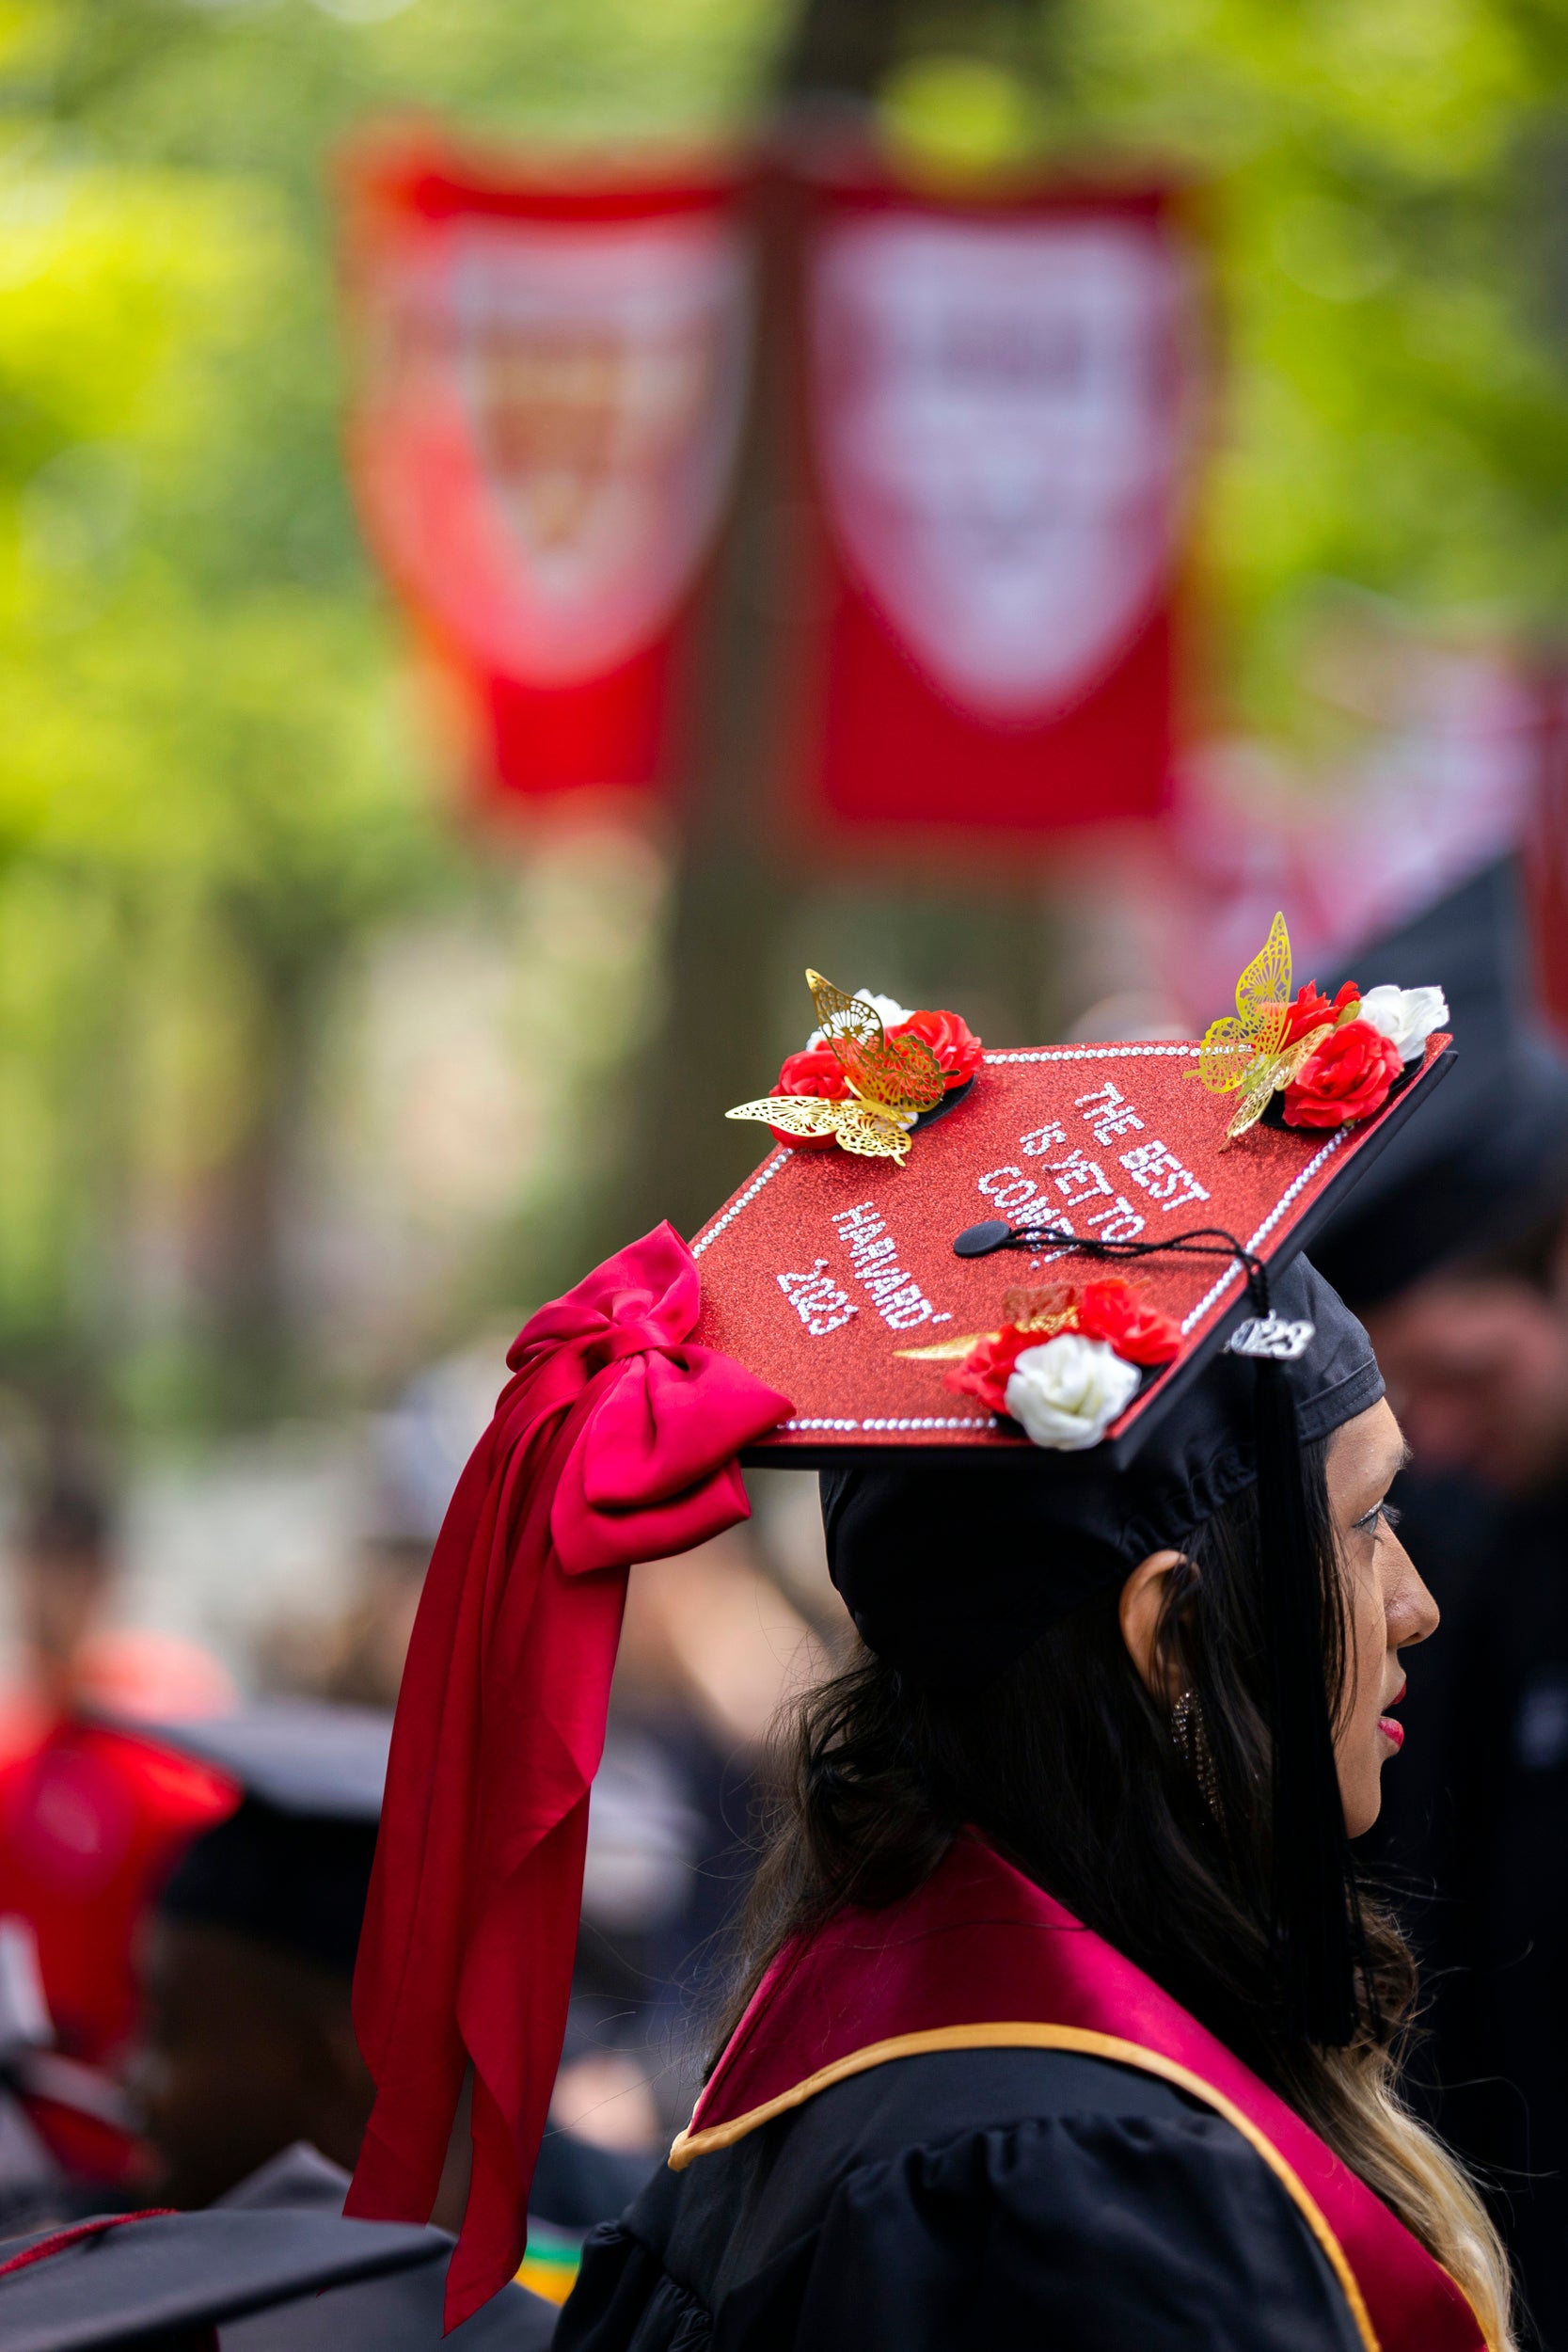 Nisha Sayed wears decorated mortarboard reading "The best is yet to come!"